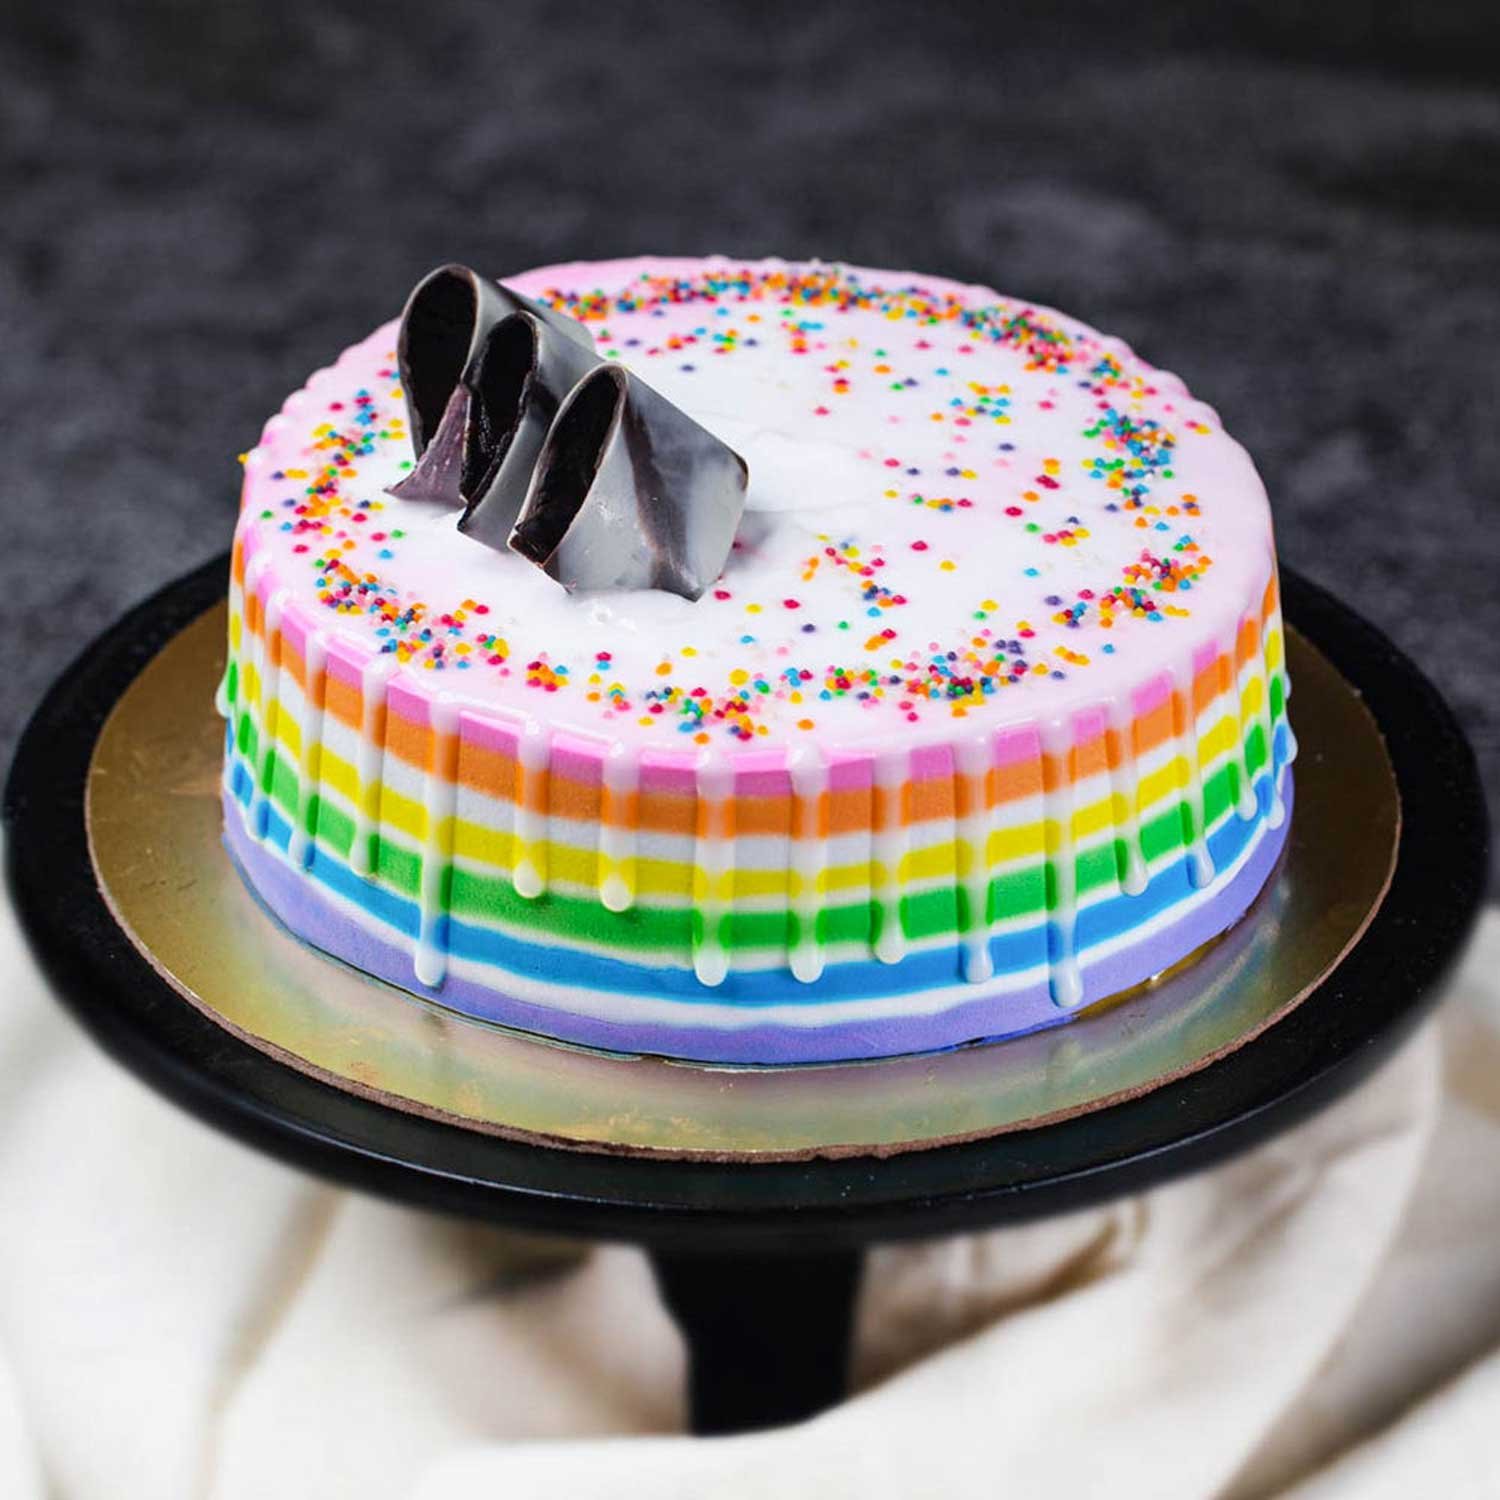 Rainbow Cake - The Cake King Offers Midnight & Online Cake Delivery In Delhi